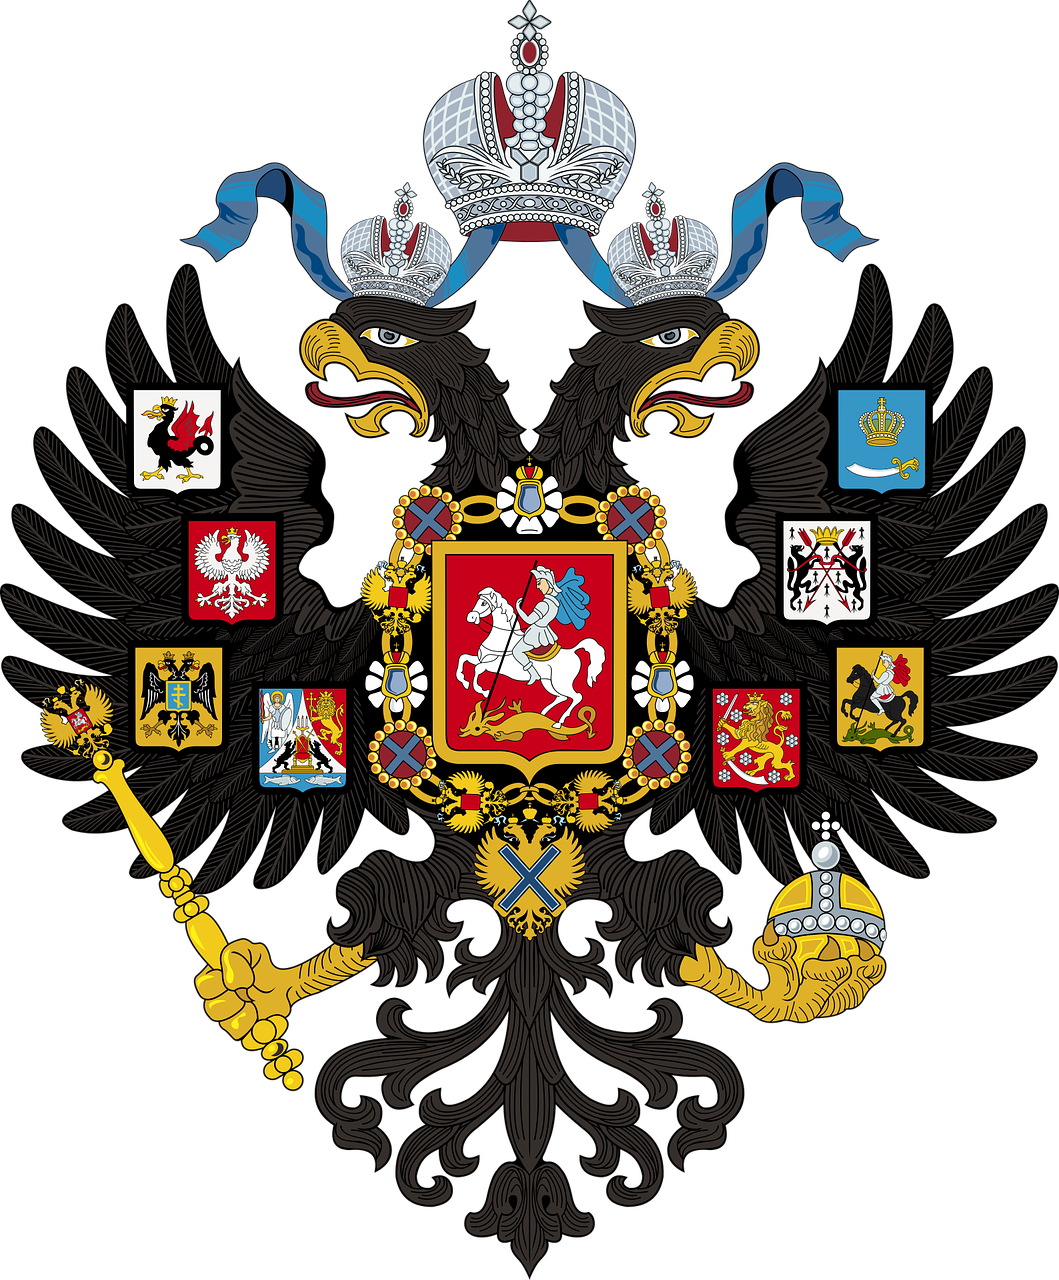 coat of arms empire russia free photo